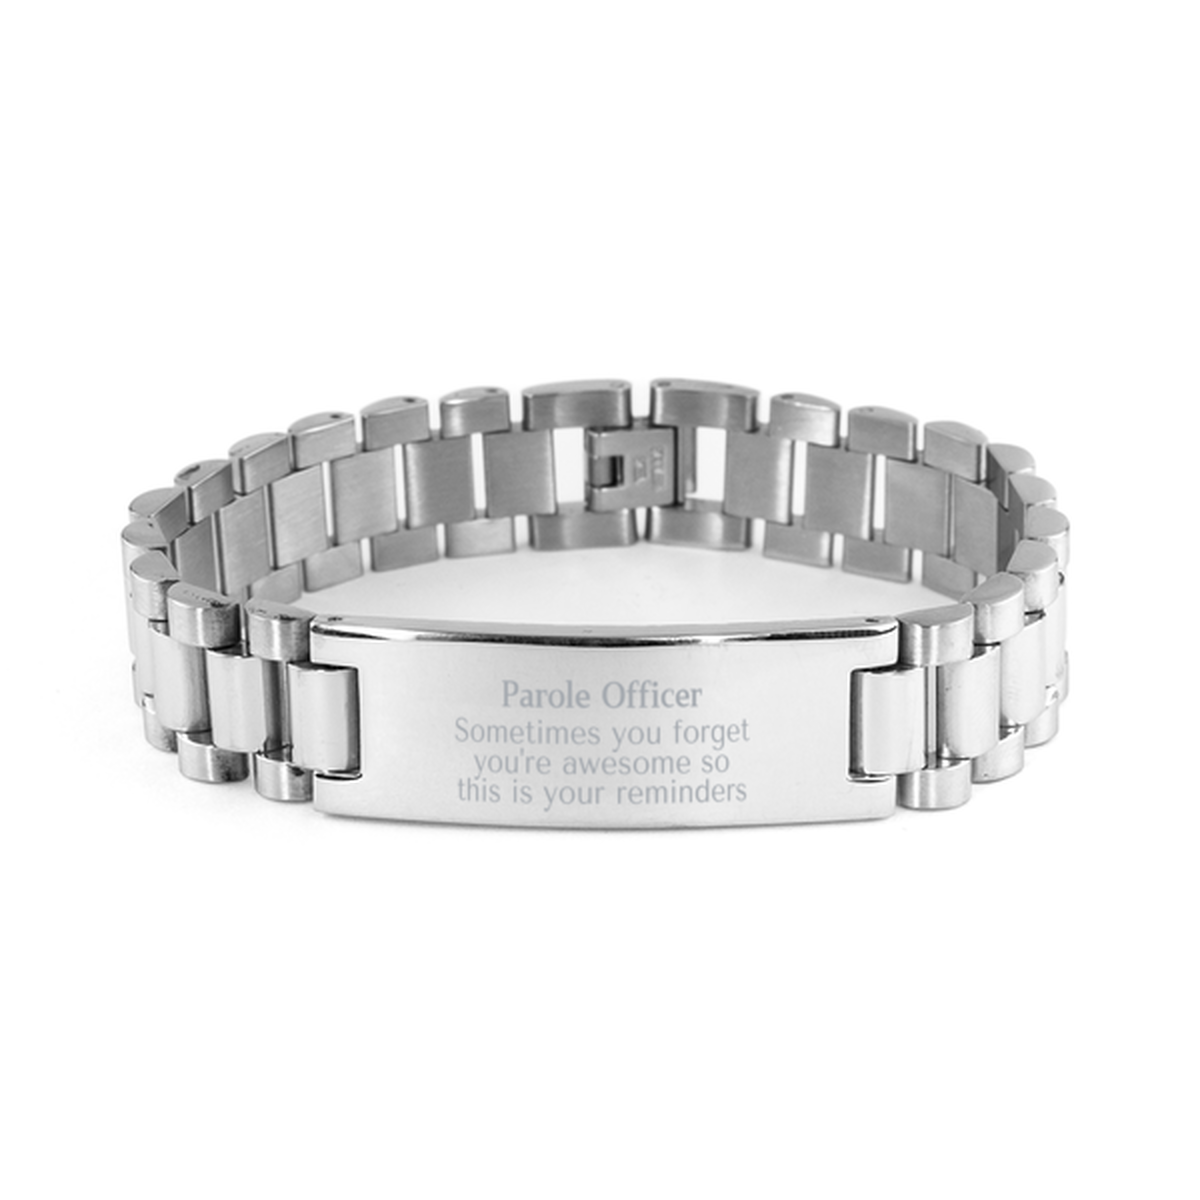 Sentimental Parole Officer Ladder Stainless Steel Bracelet, Parole Officer Sometimes you forget you're awesome so this is your reminders, Graduation Christmas Birthday Gifts for Parole Officer, Men, Women, Coworkers